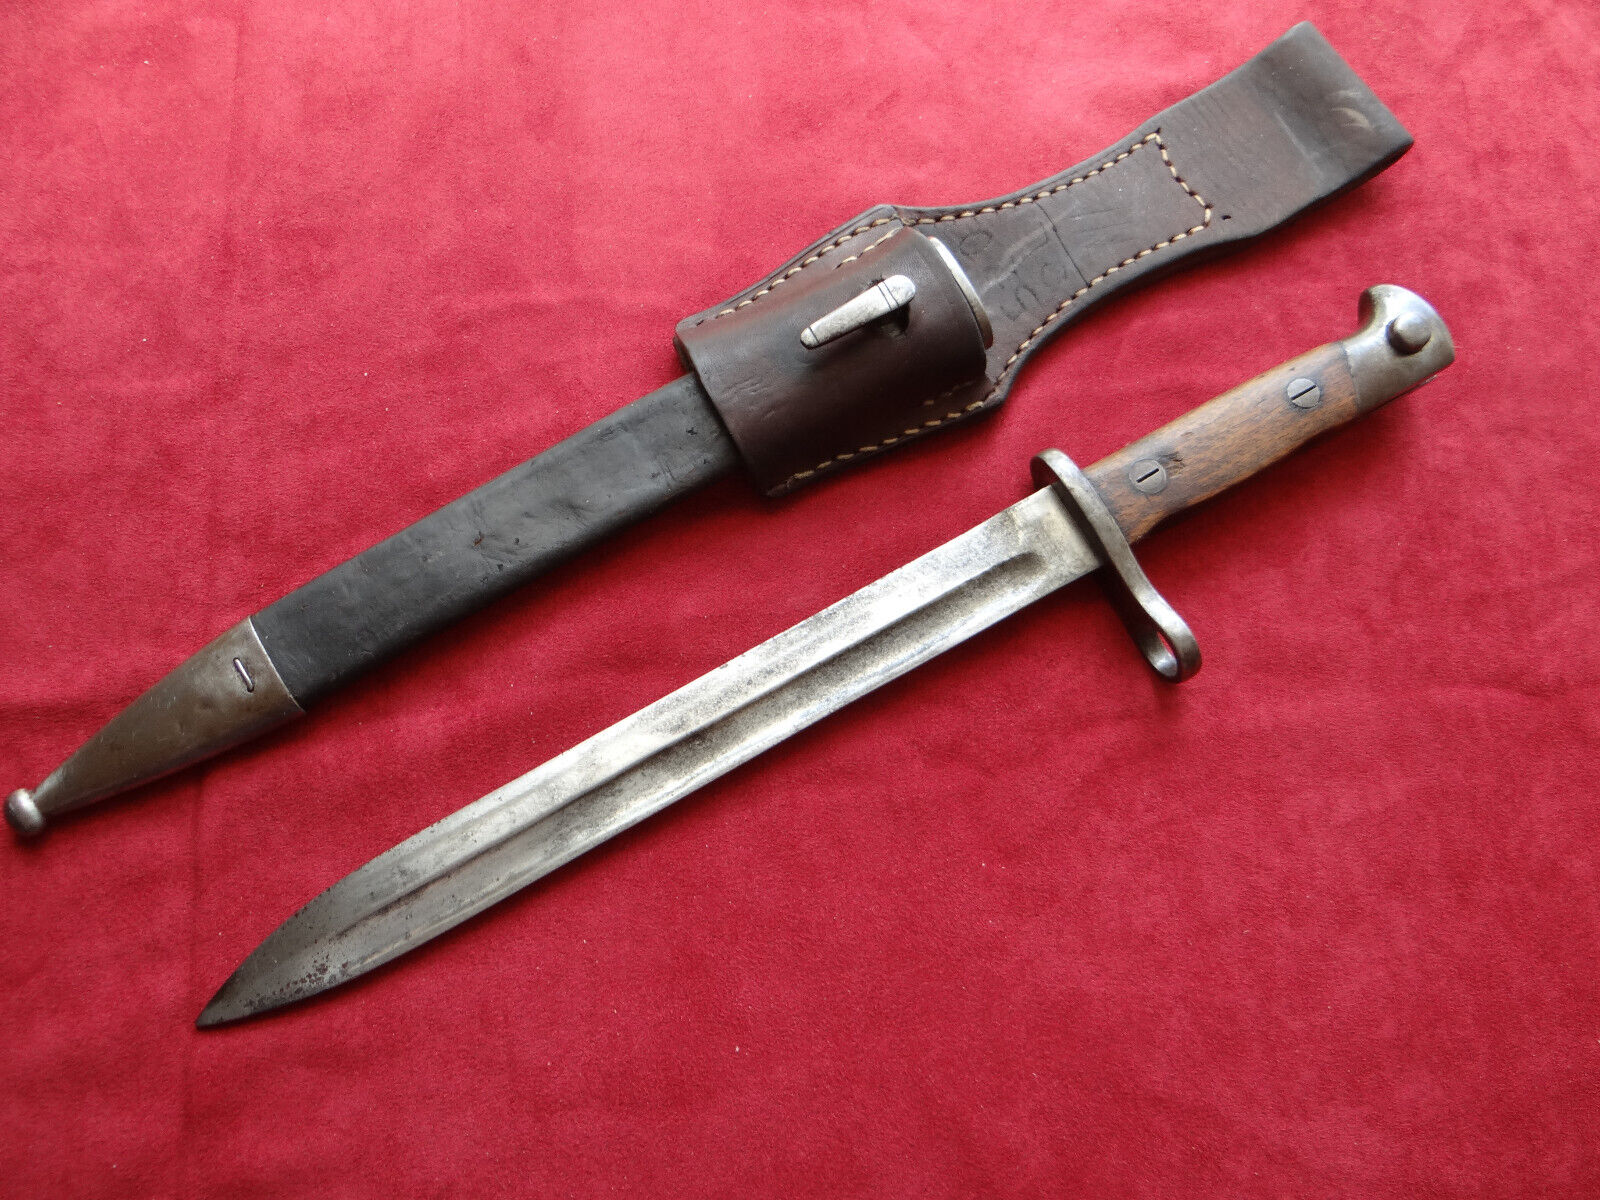 M1892/93 Spanish Mauser Bayonet - Simson & Co Suhl Marked, Scabbard and Frog